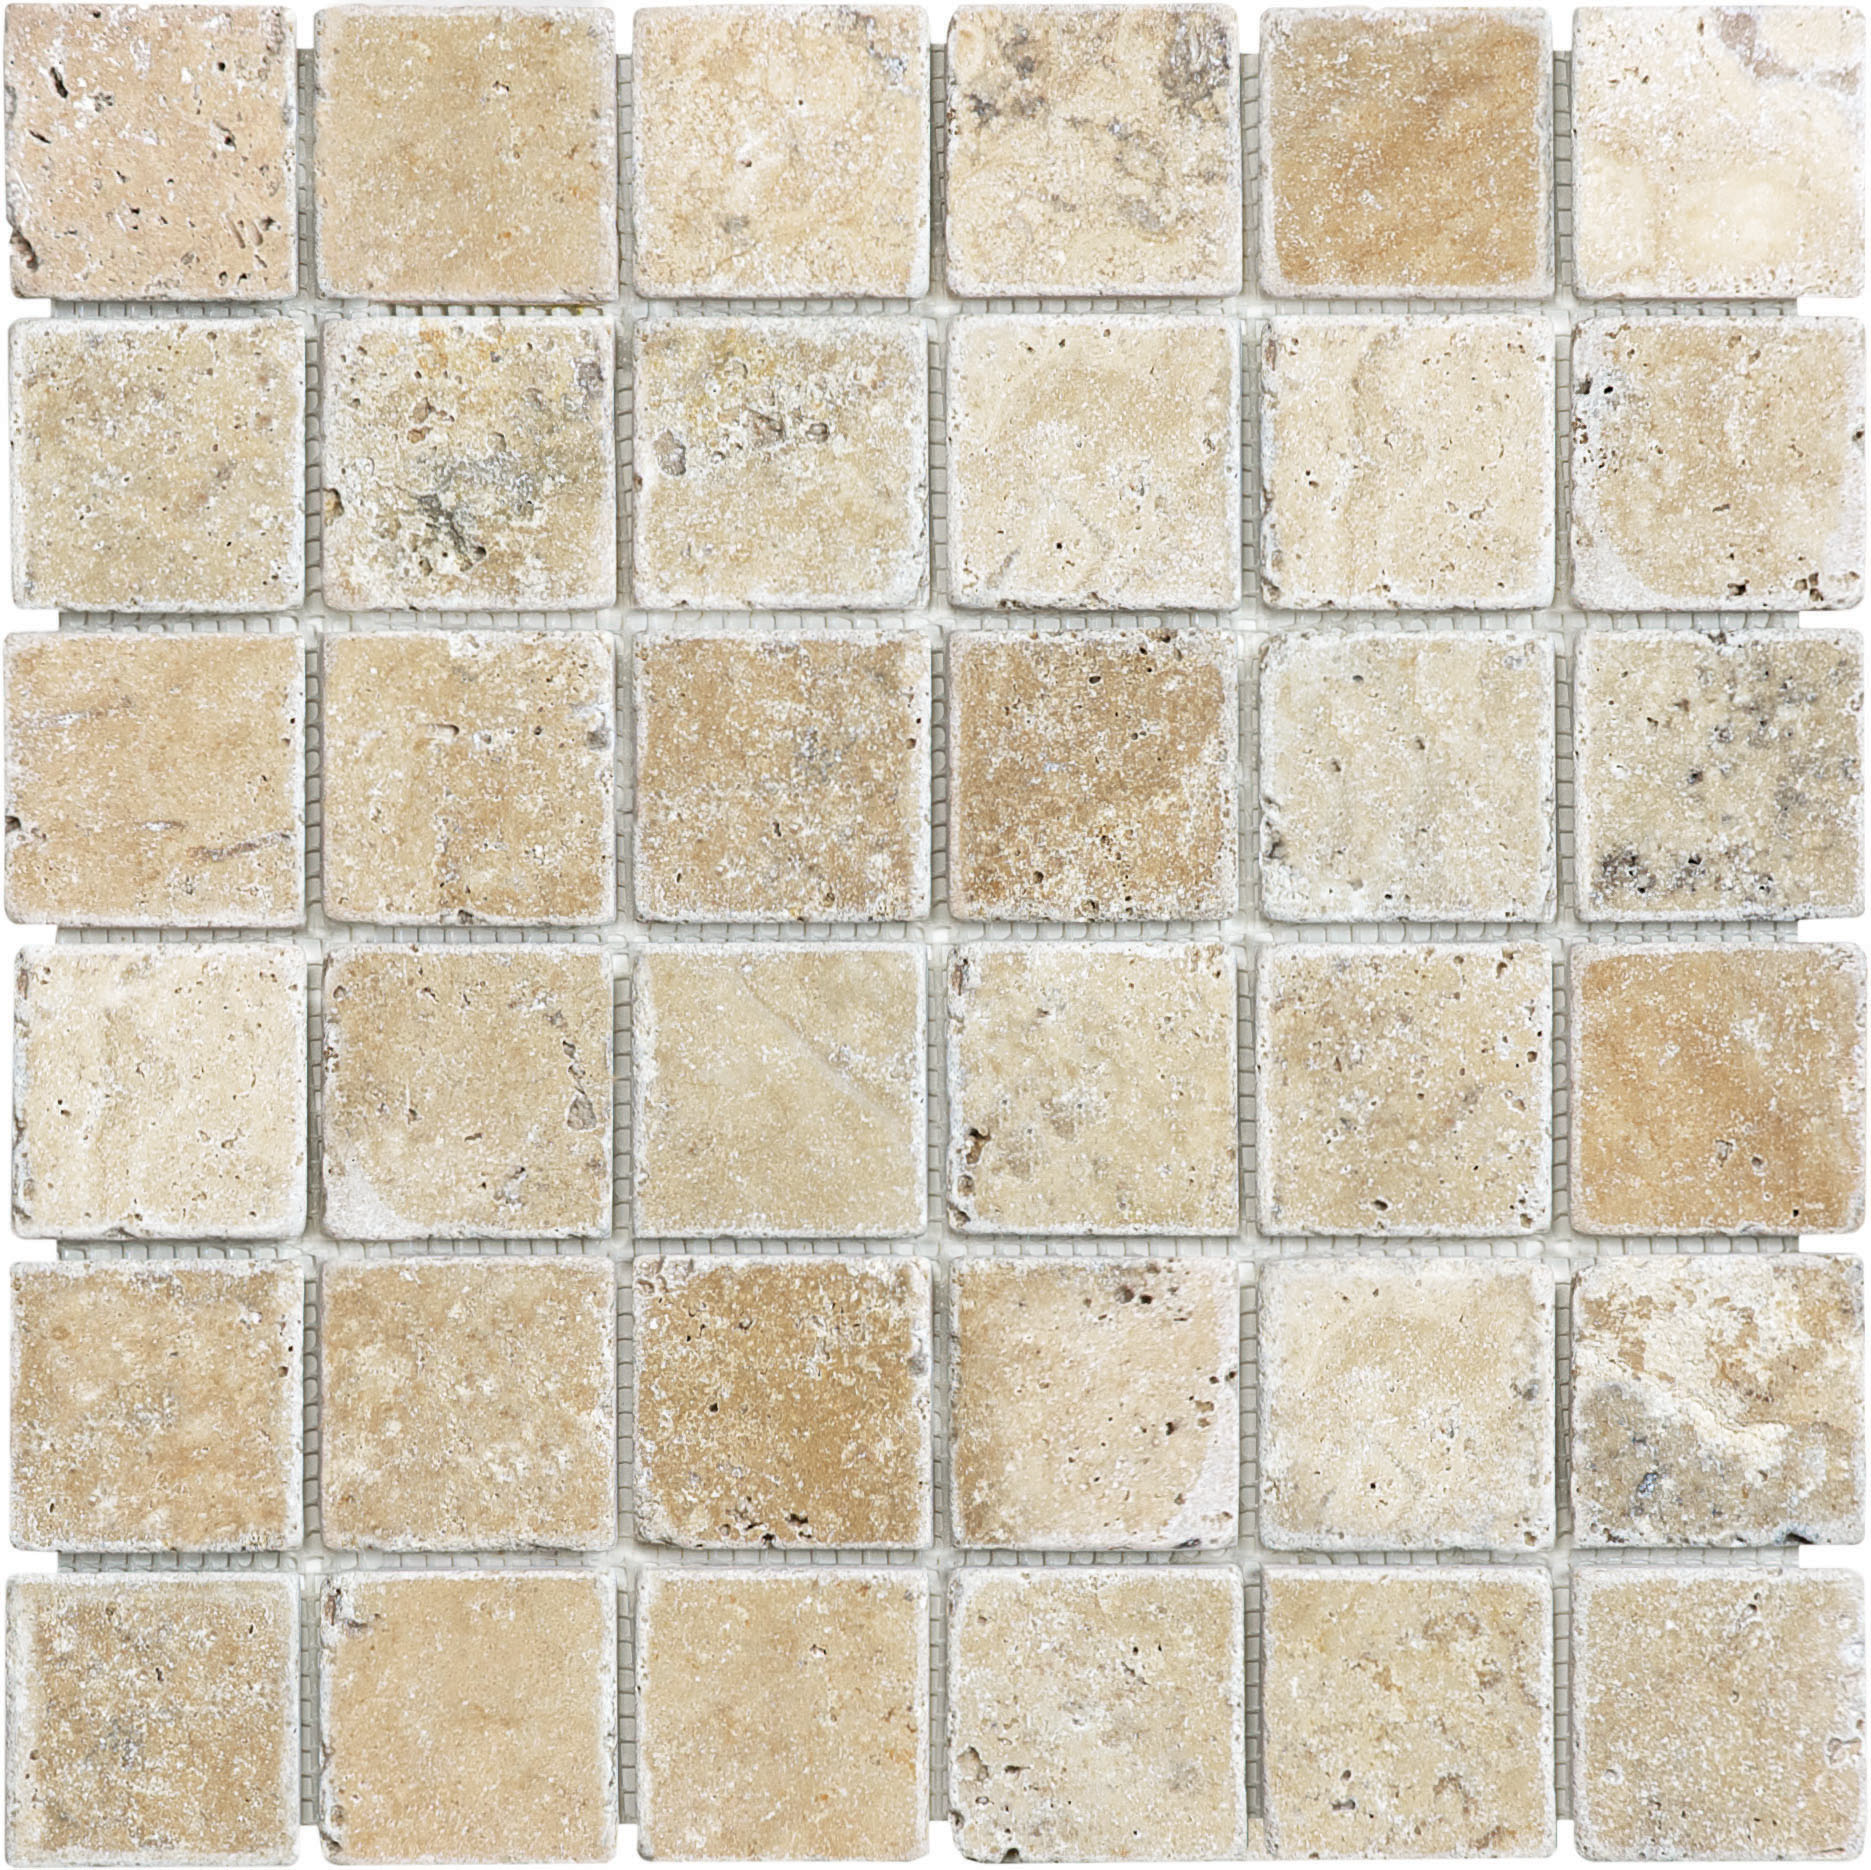 travertine straight stack 2x2-inch pattern natural stone mosaic from picasso anatolia collection distributed by surface group international tumbled finish tumbled edge mesh shape